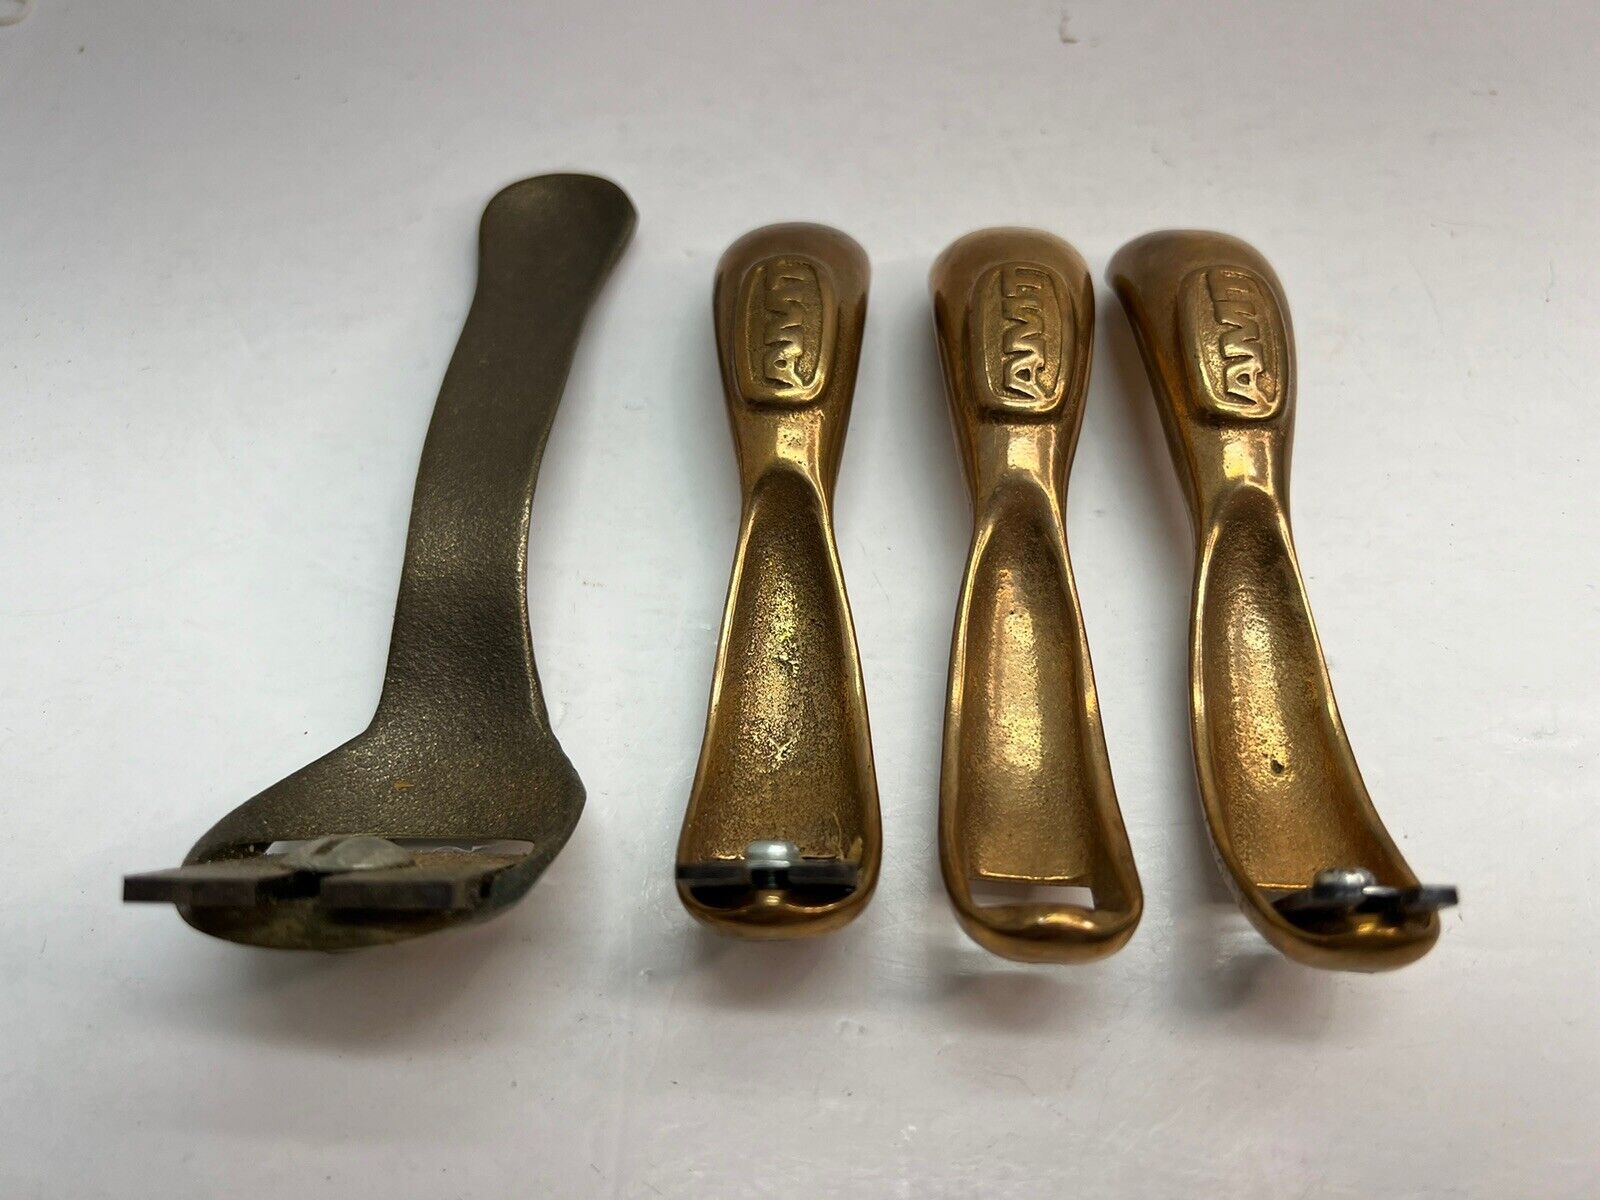 3 Vtg AMT +1 American Machine & Tool Co Brass Luthiers Violin Makers Plane Tool